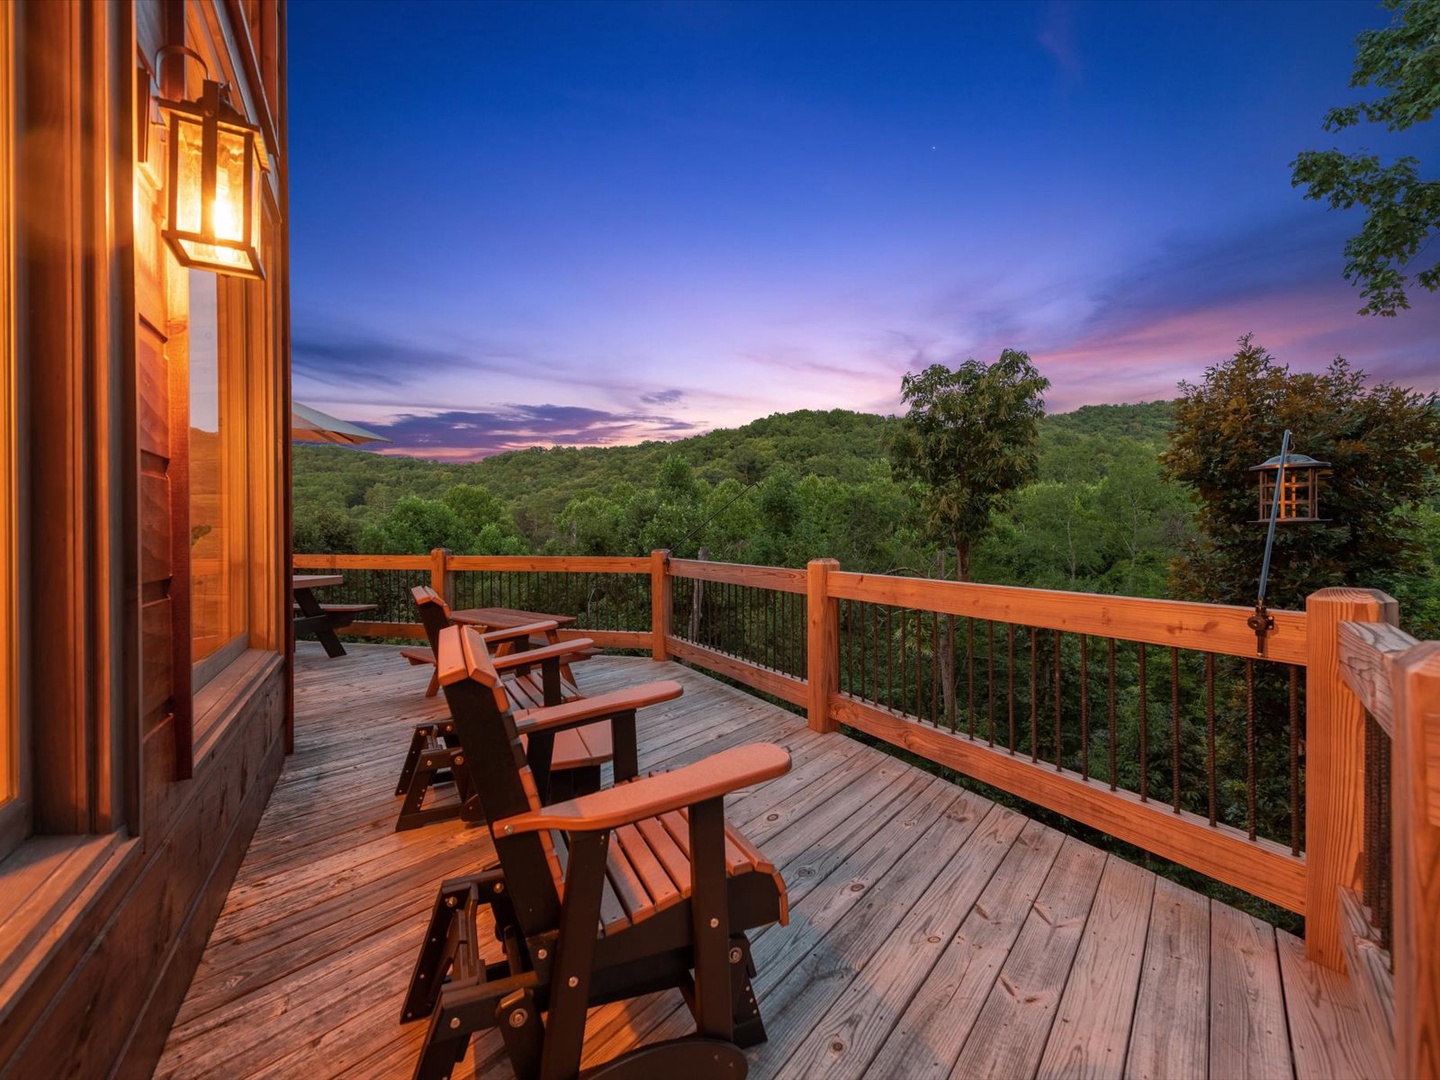 Whisky Creek Retreat- Entry deck view with outdoor seating